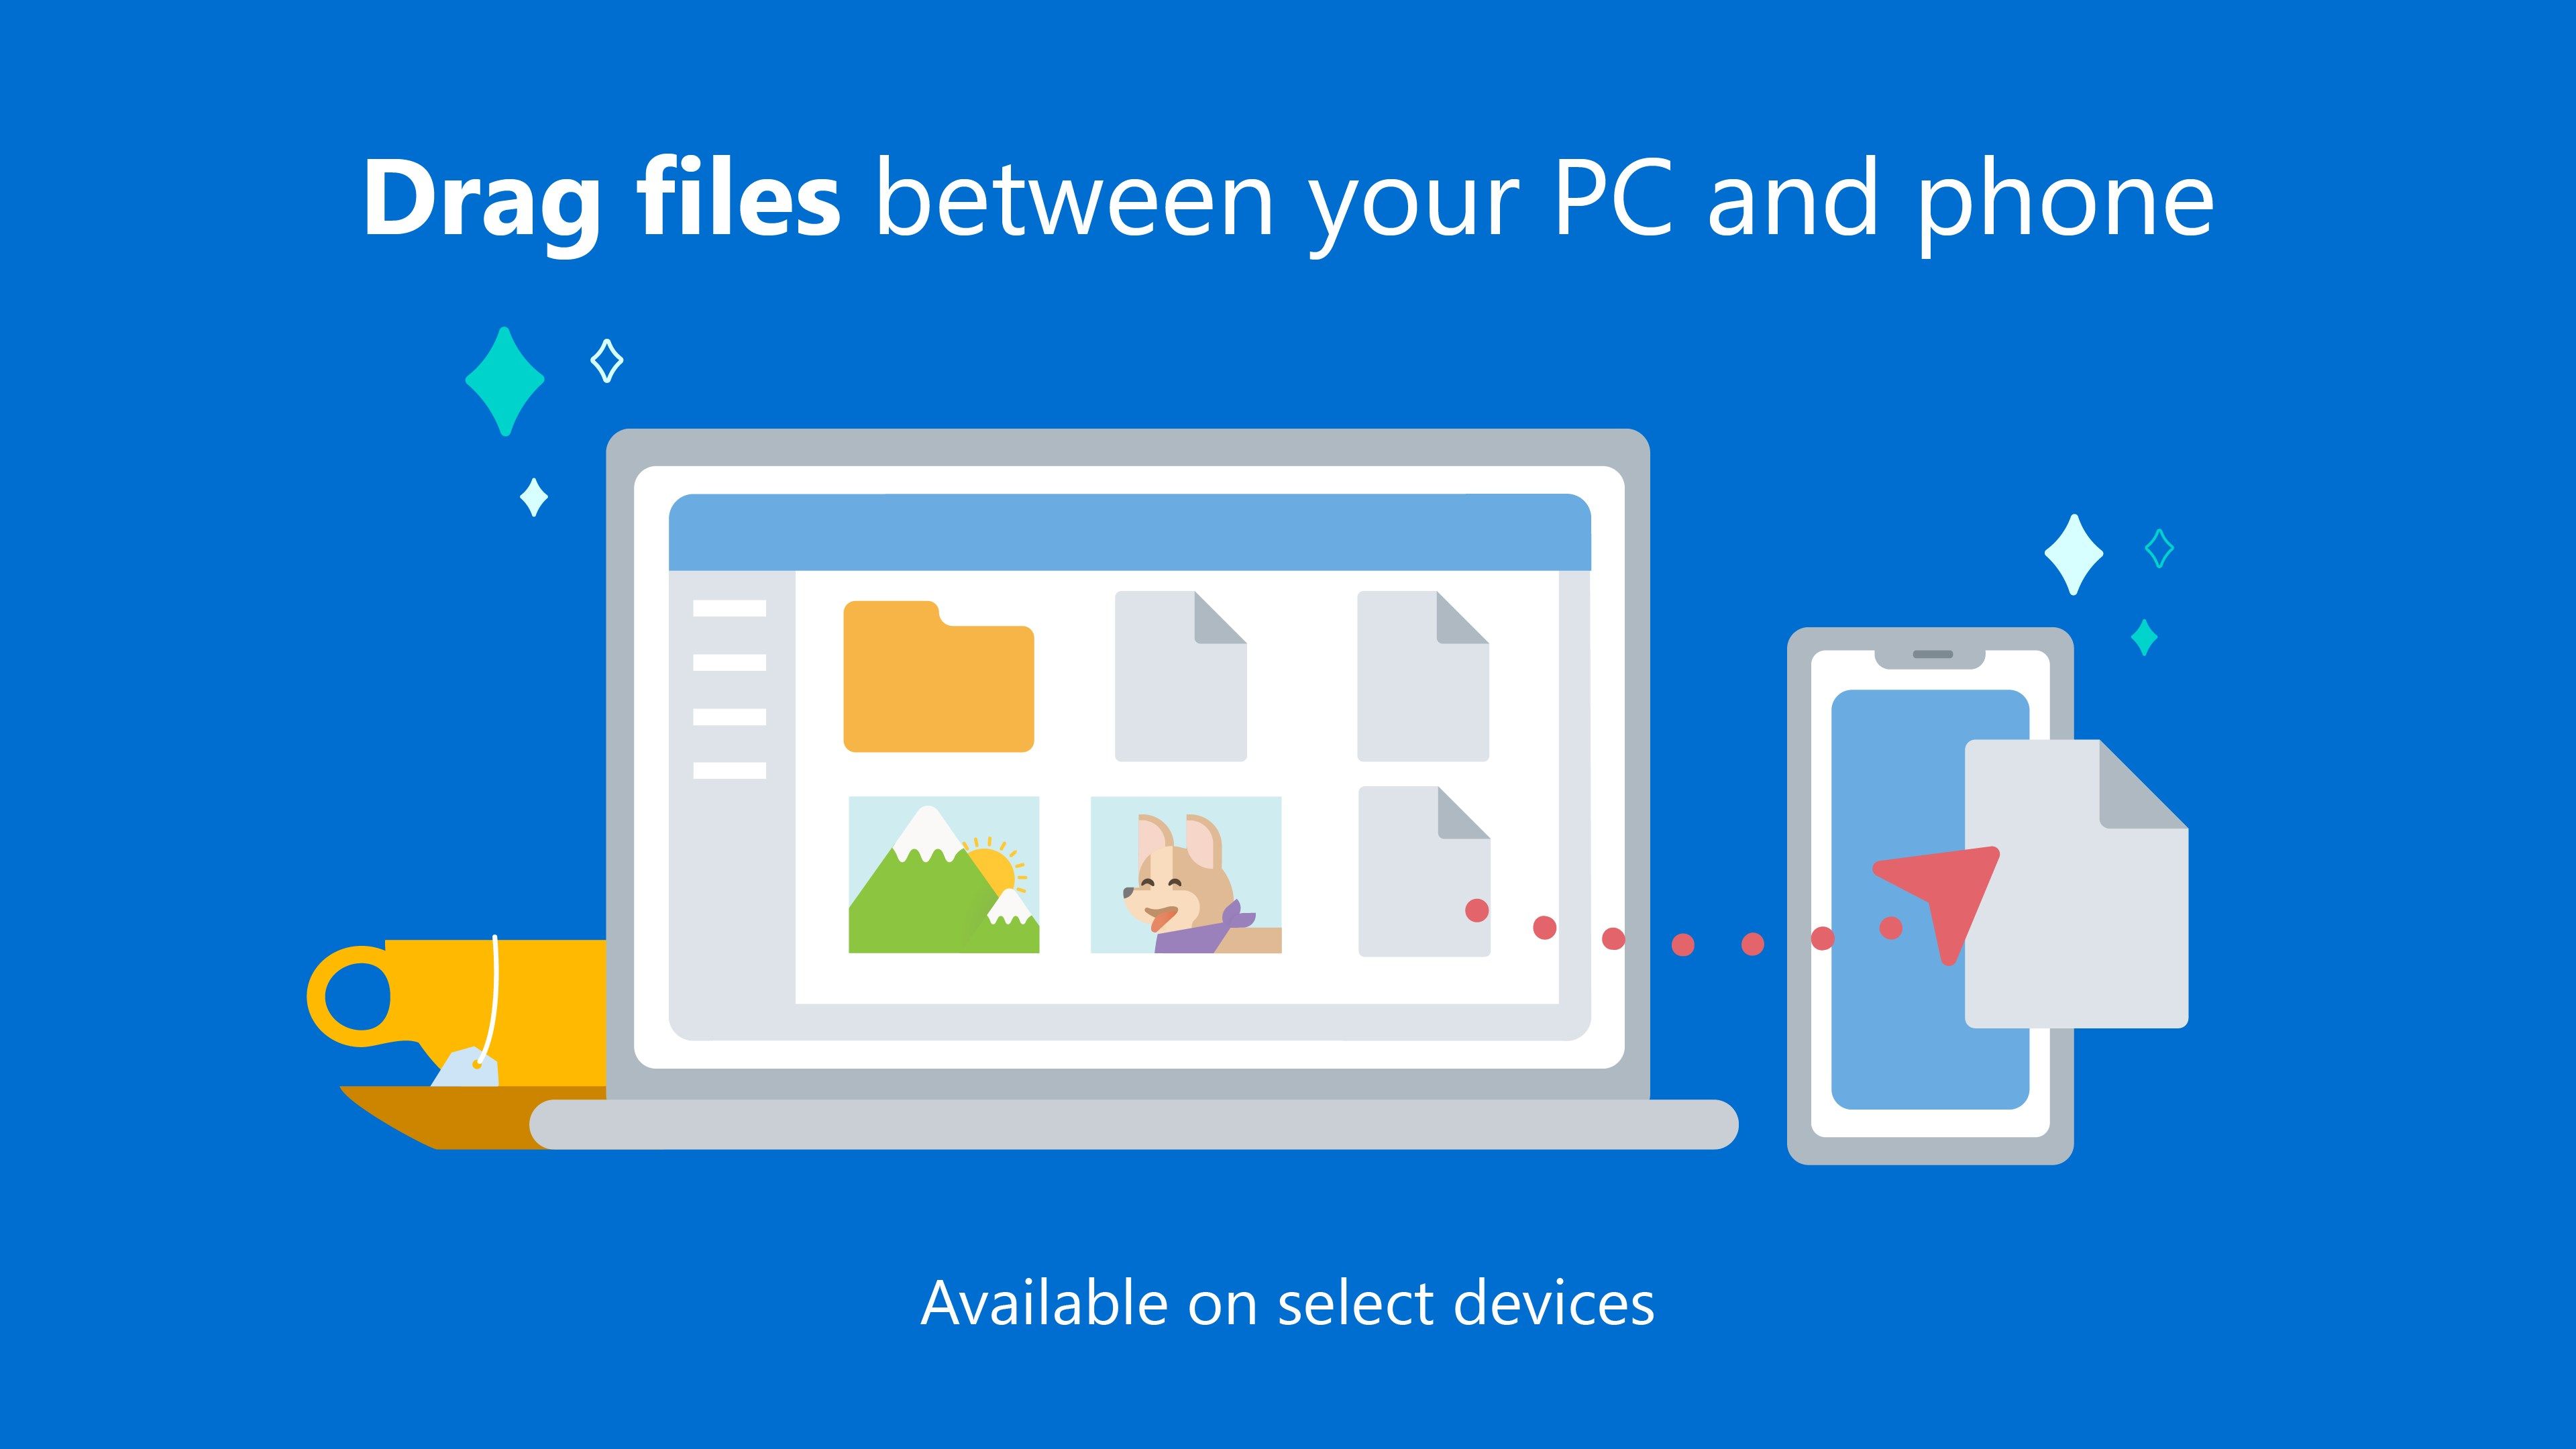 Wirelessly drag and drop files from your phone to your PC and vice versa without having to dig for cables.